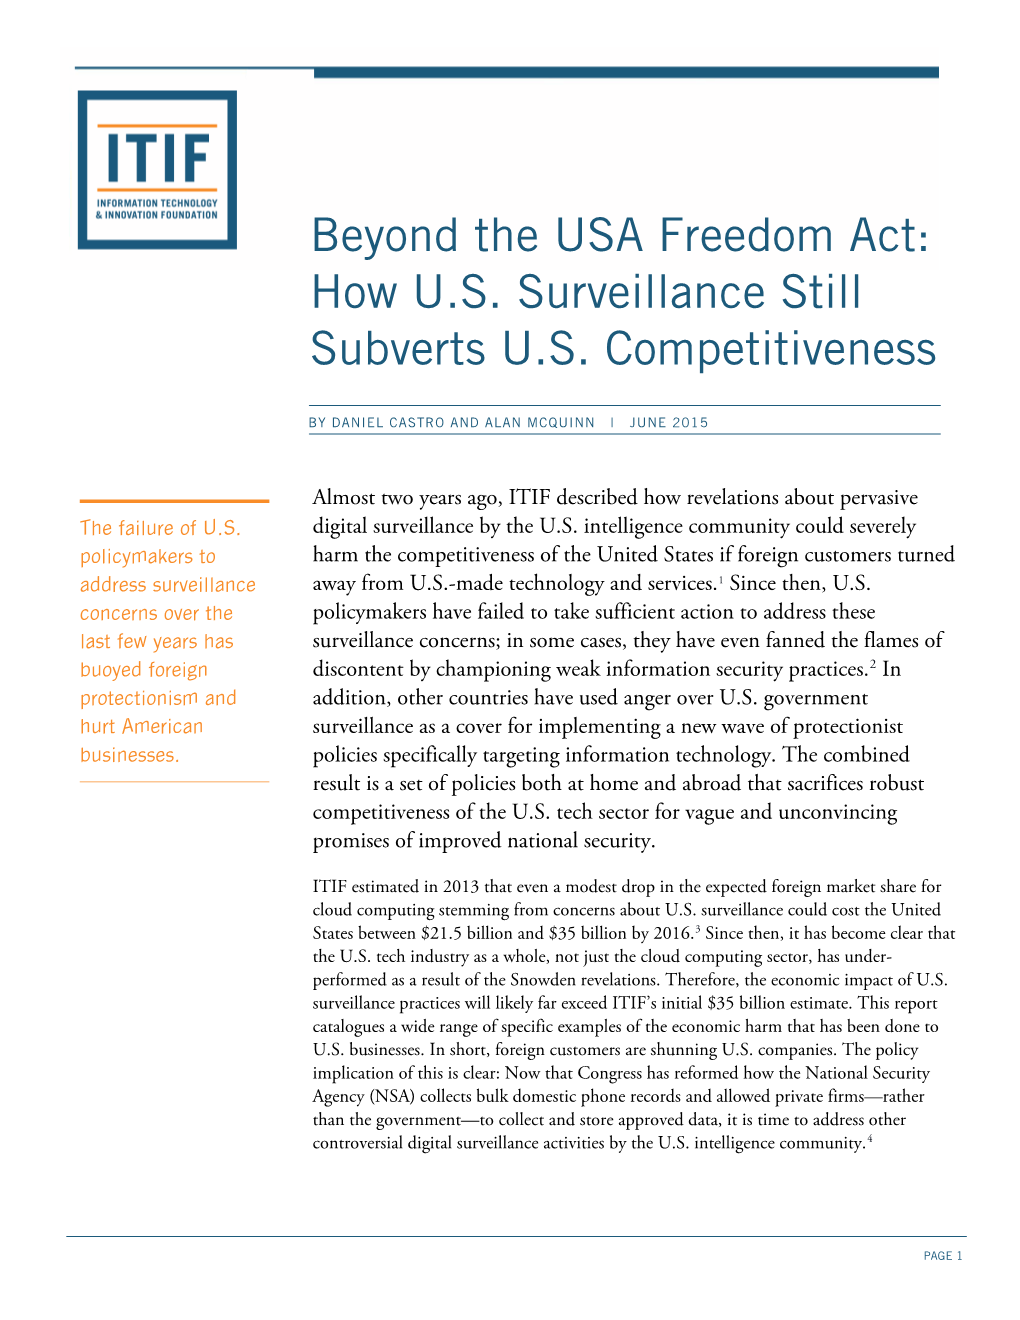 Beyond the USA Freedom Act: How U.S. Surveillance Still Subverts U.S. Competitiveness